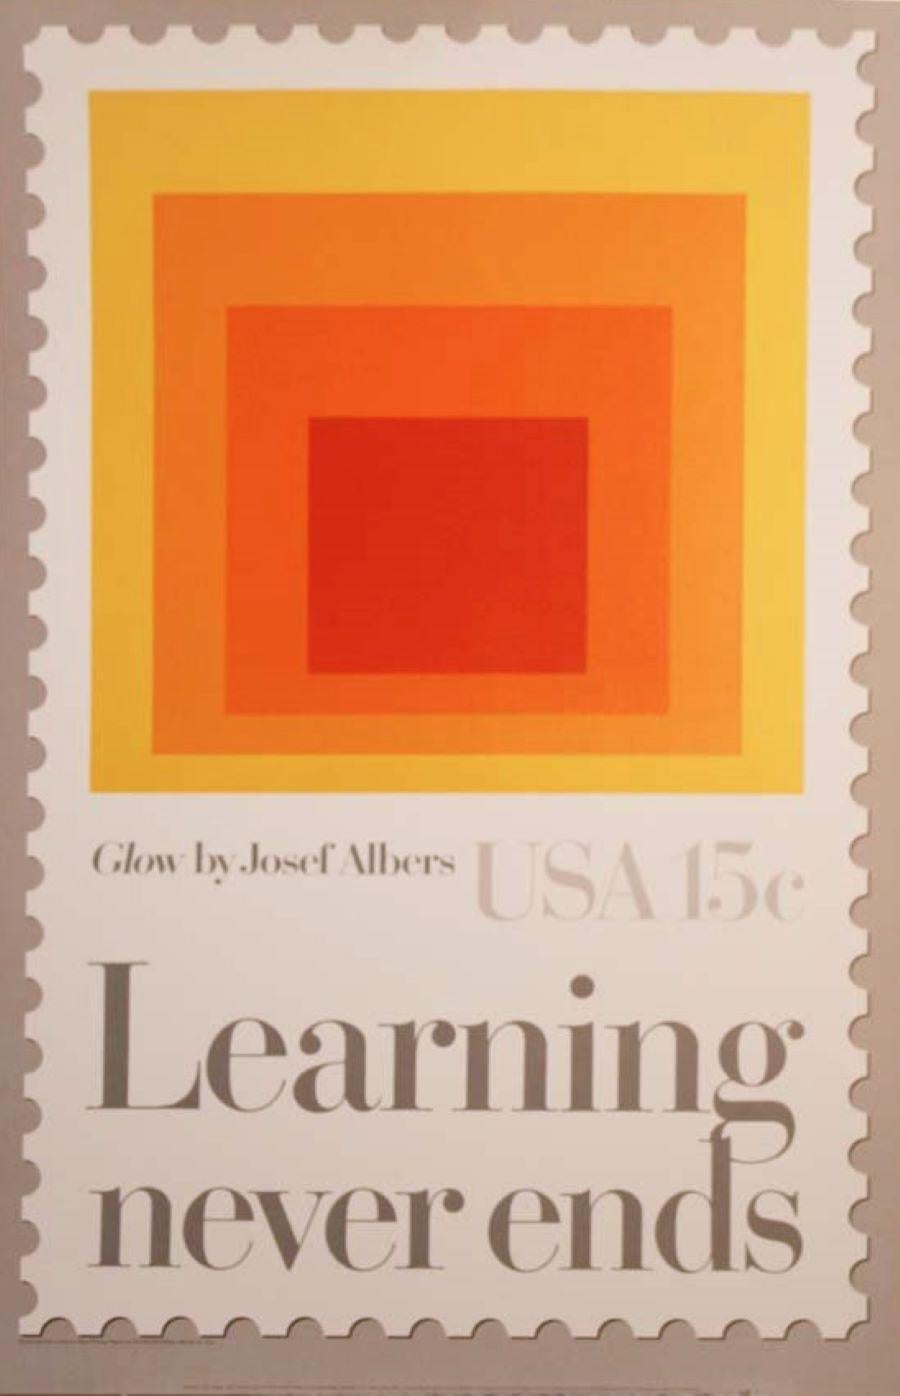 (after) Josef Albers Abstract Print - "Learning Never Ends" Stamp/The Department of Education-Featuring "Glow" 